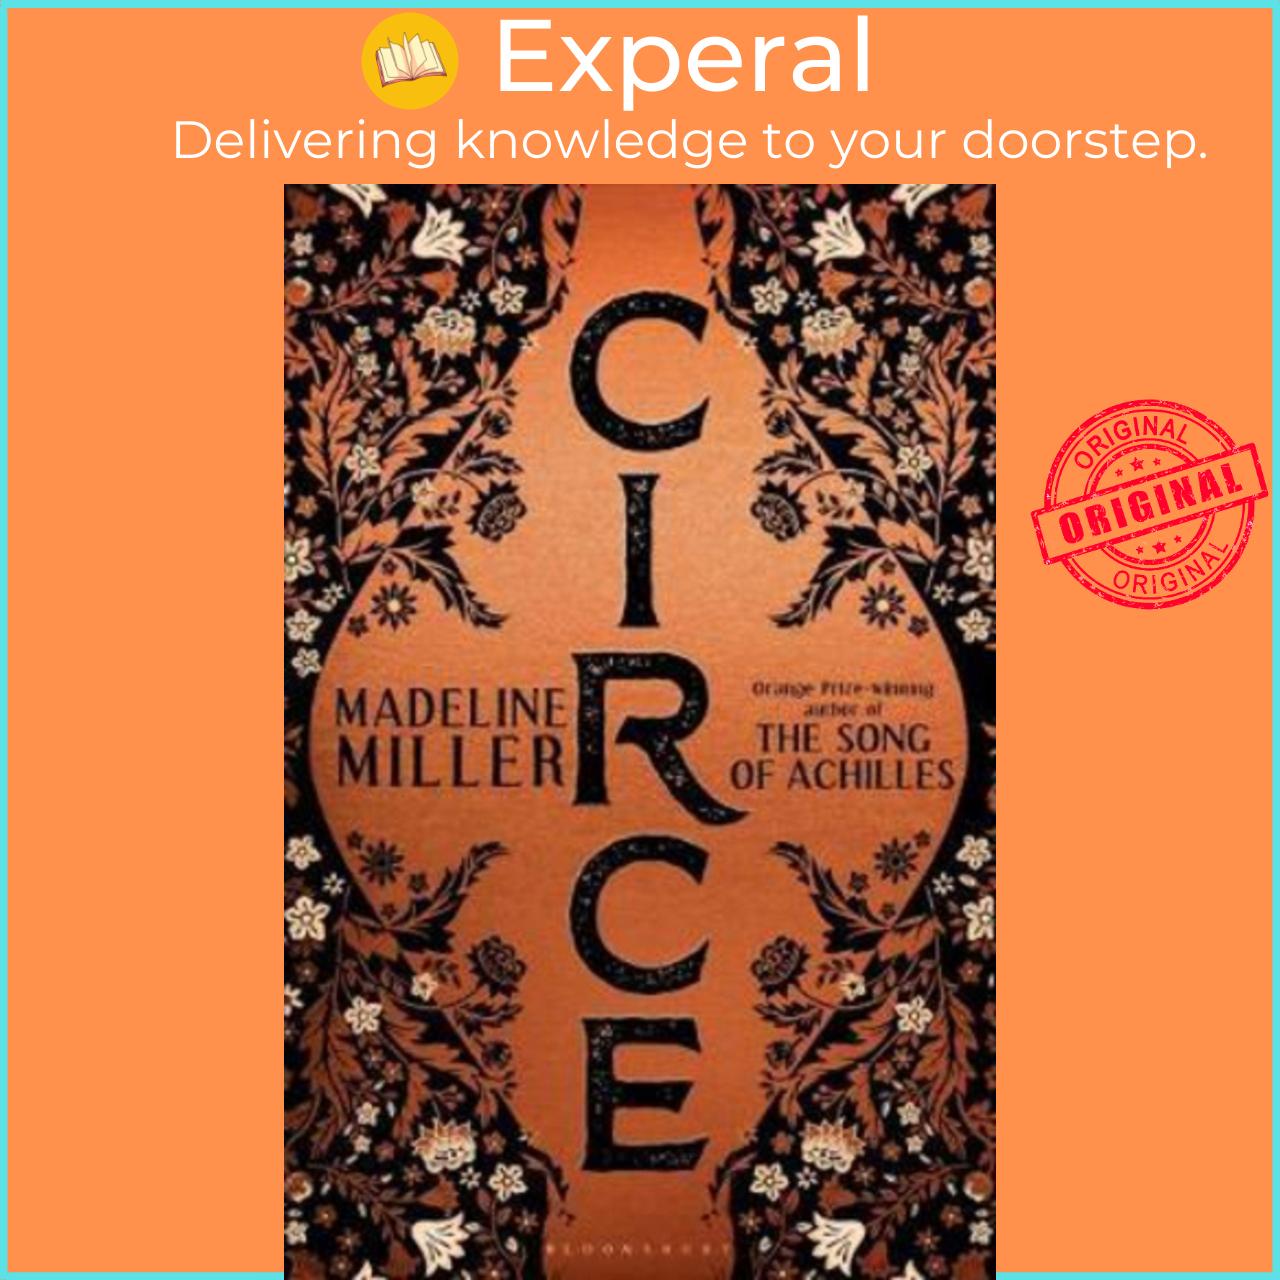 Sách - Circe : The International No. 1 Bestseller - Shortlisted for the Women&#x27;s Prize for Fiction 2019 by Madeline Miller - (UK Edition, hardcover)